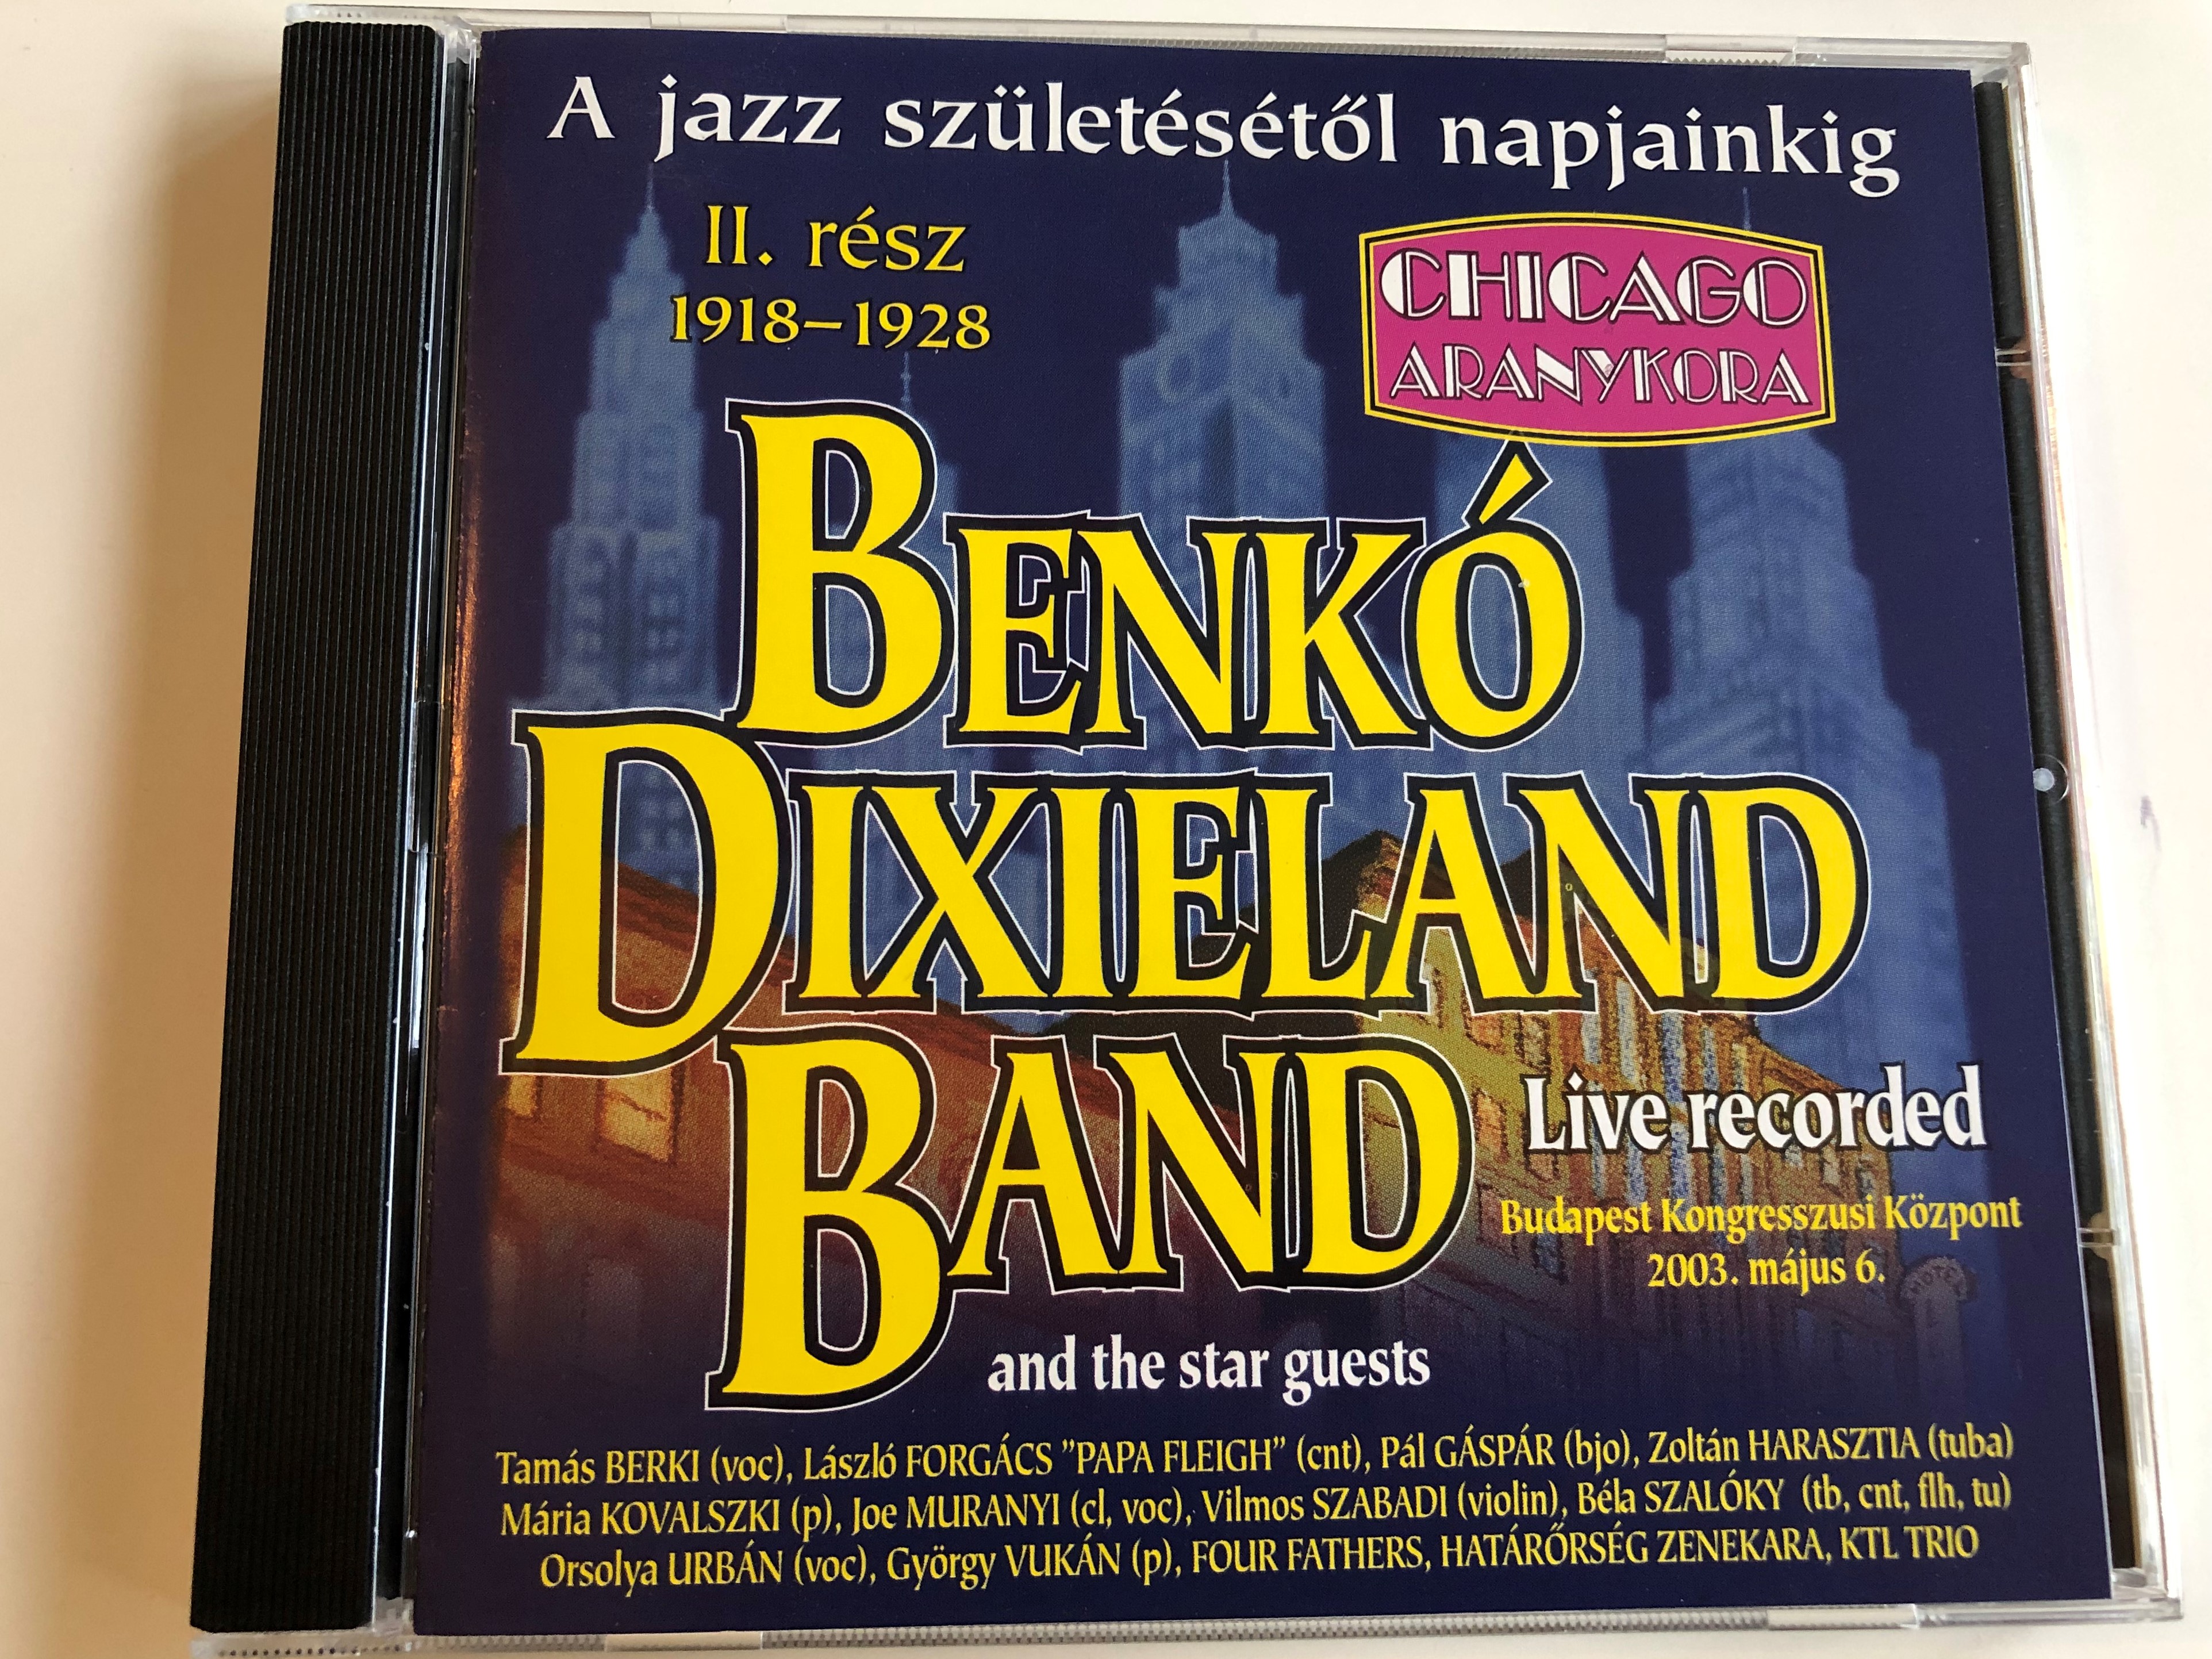 benk-dixieland-band-koncert-a-jazz-sz-let-s-t-l-napjainkig-1918-1928-from-the-birth-of-jazz-to-our-days-benk-dixieland-band-concert-1918-1928-part-two-ii.-r-sz-golden-age-of-chicago-1-.jpg